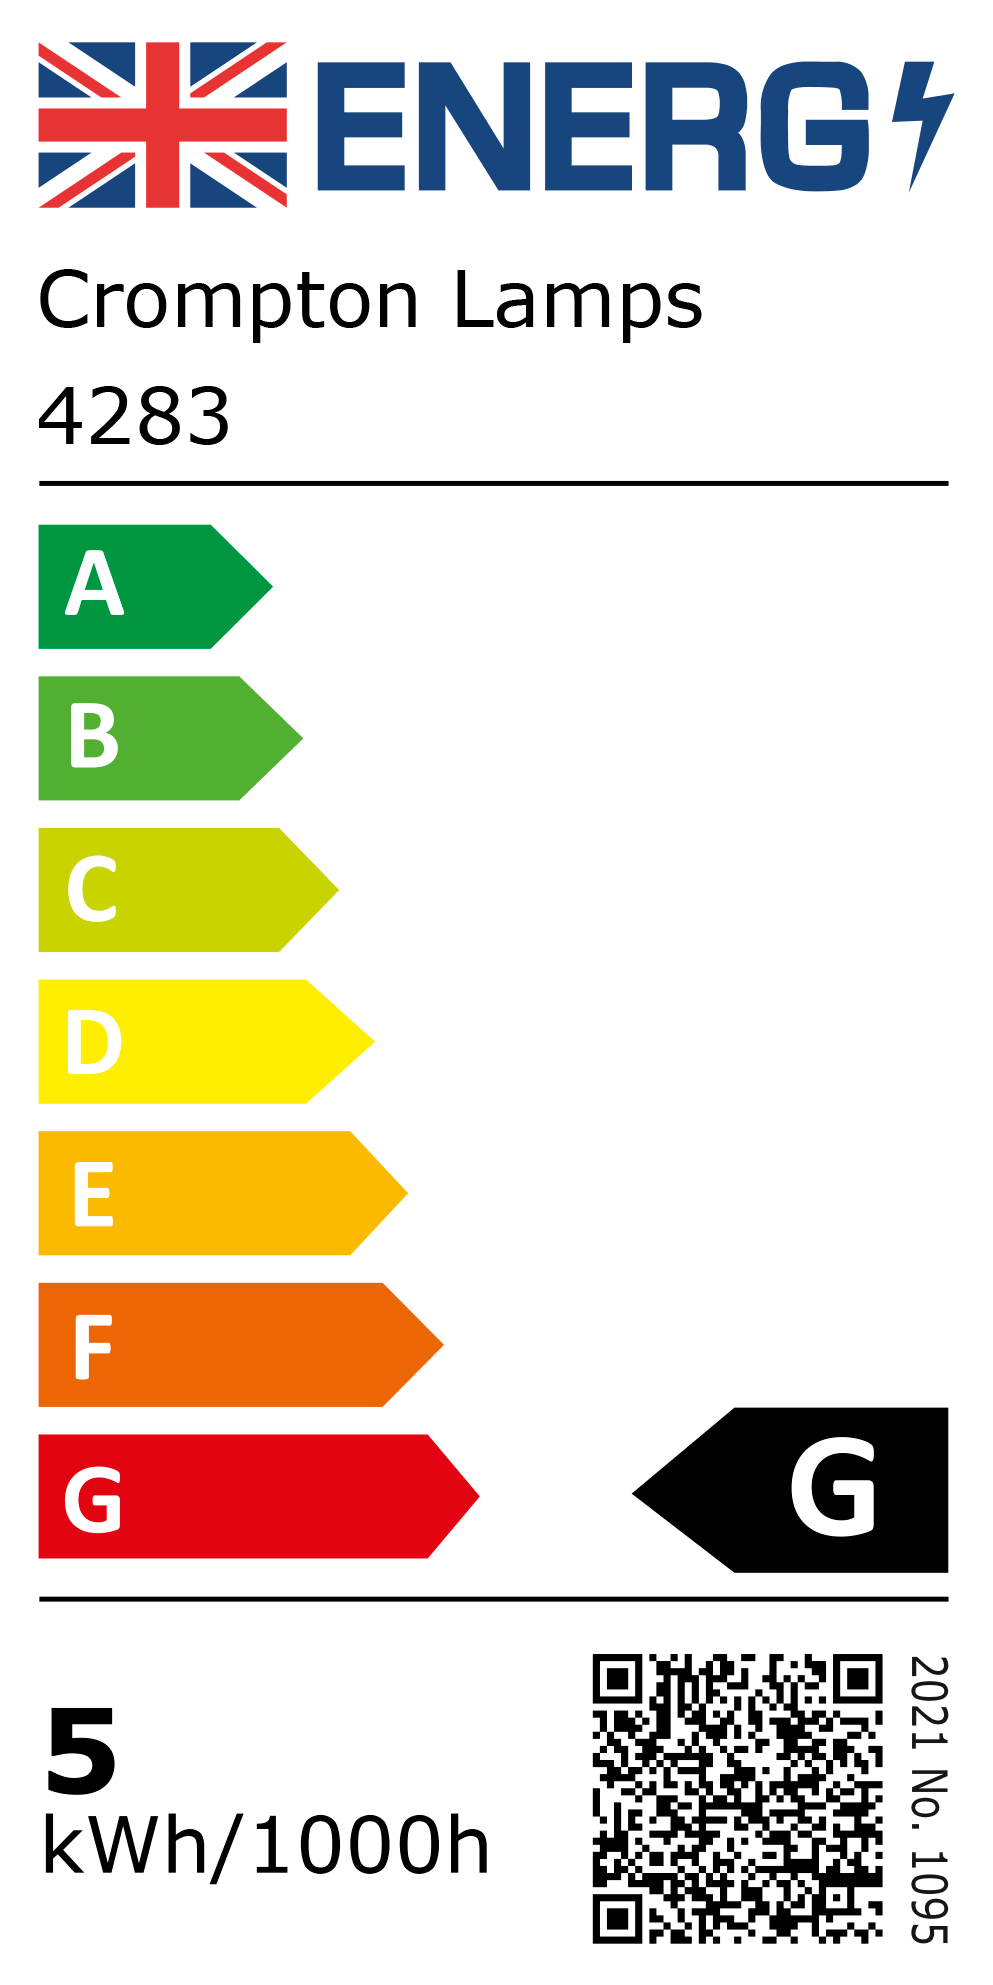 New 2021 Energy Rating Label: Stock Code 4283